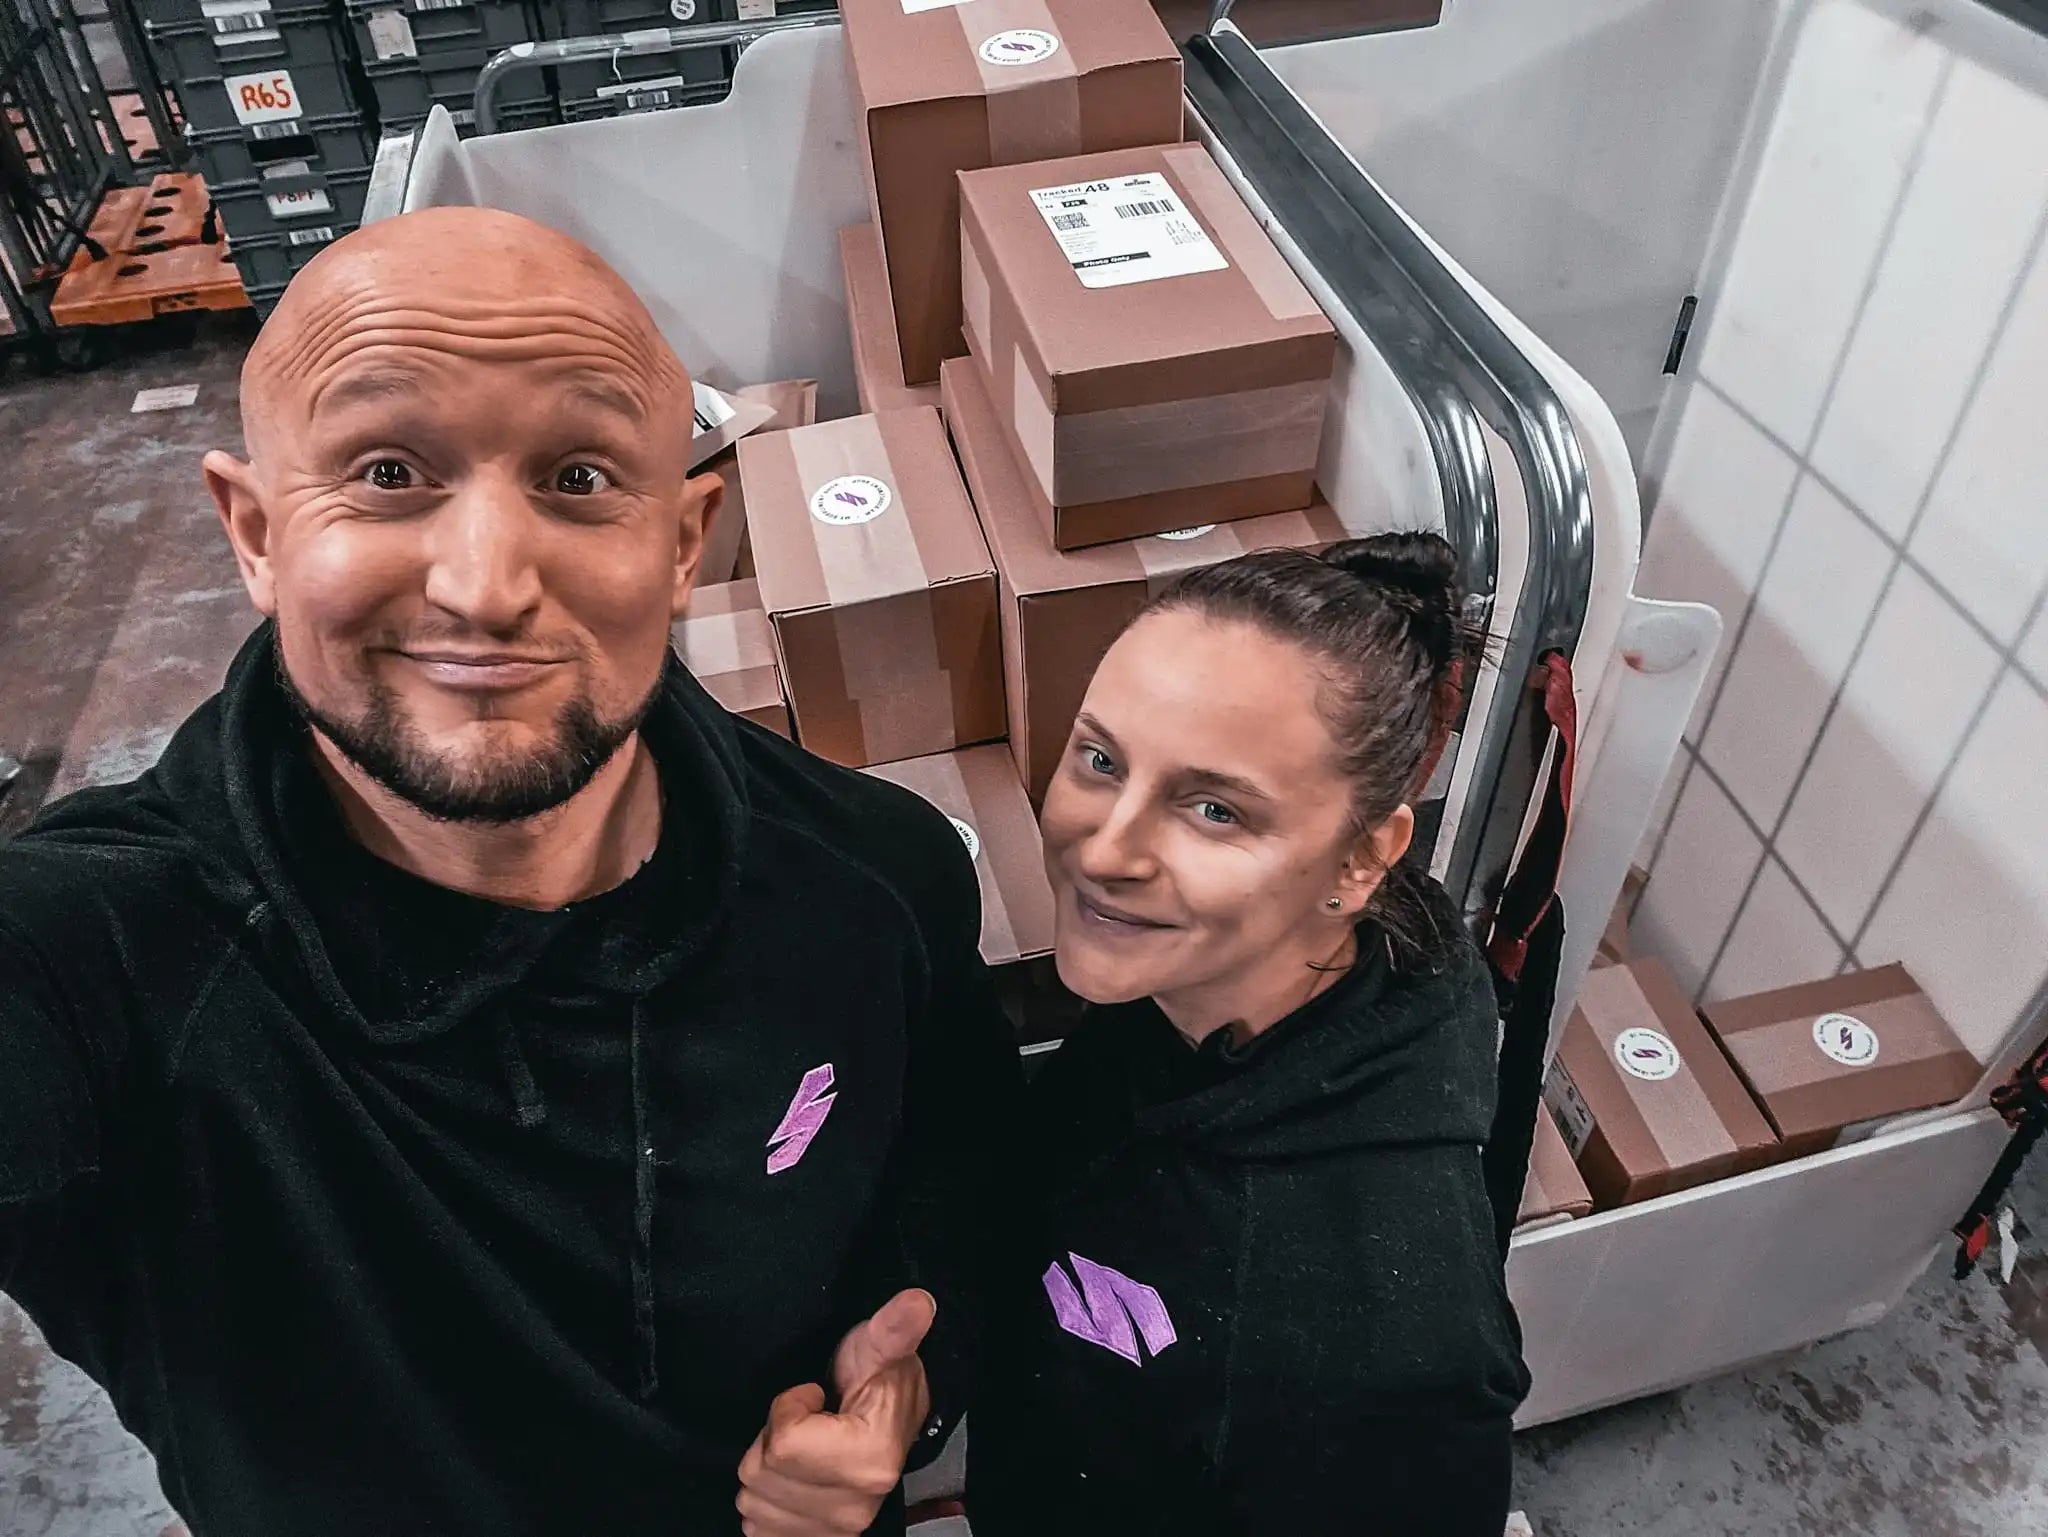 MSS Founder Chris & Kacie Packing Orders at the Weekend